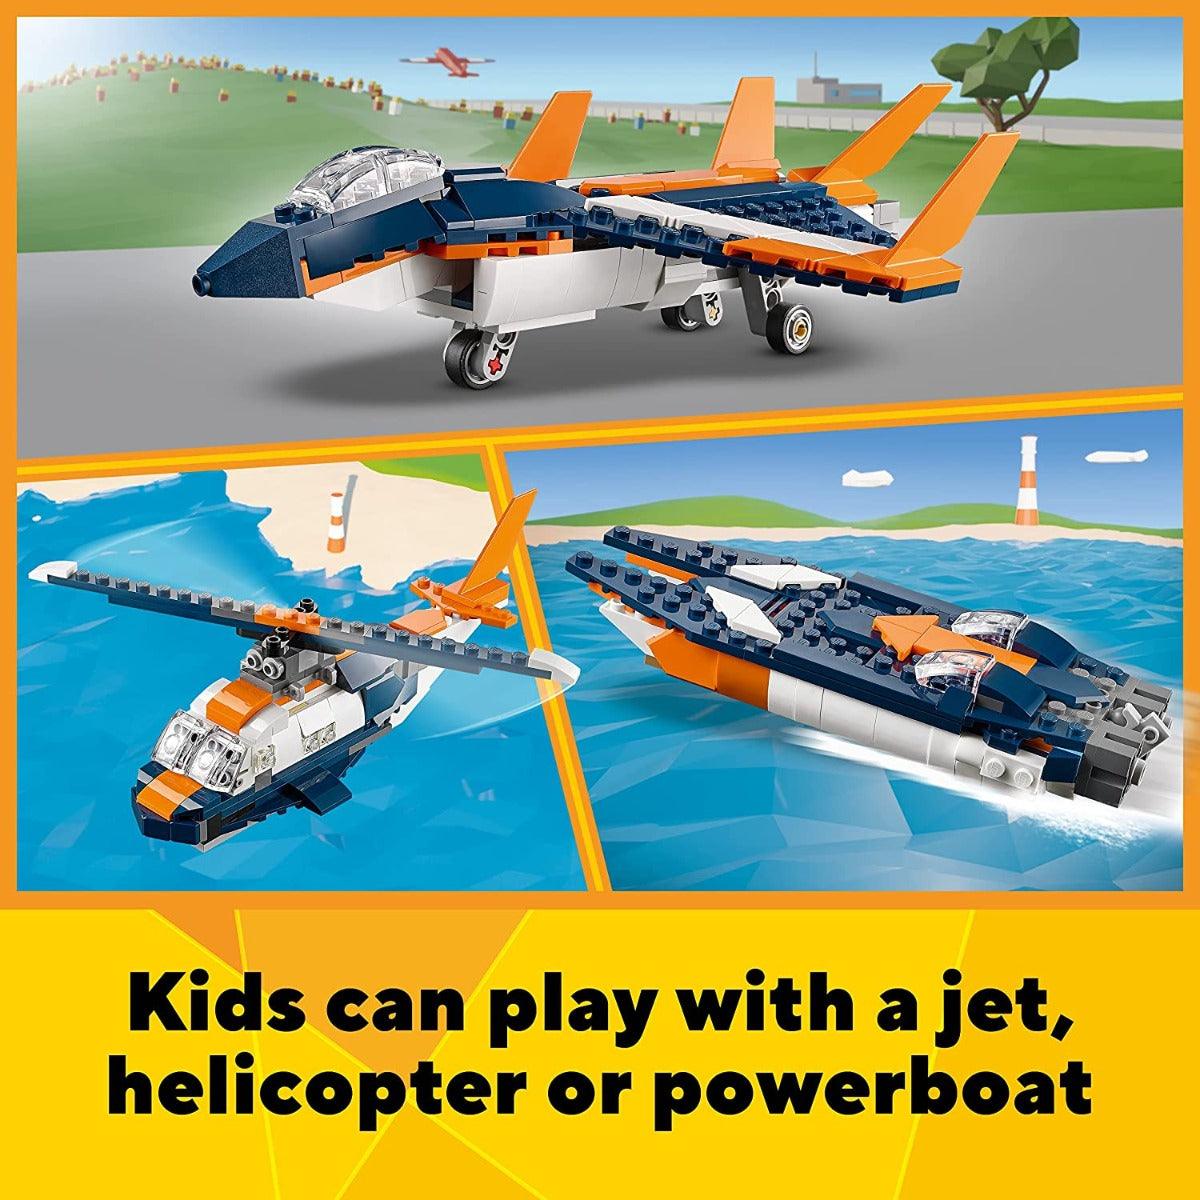 LEGO Creator 3in1 Supersonic Jet Building Kit for Ages 7+